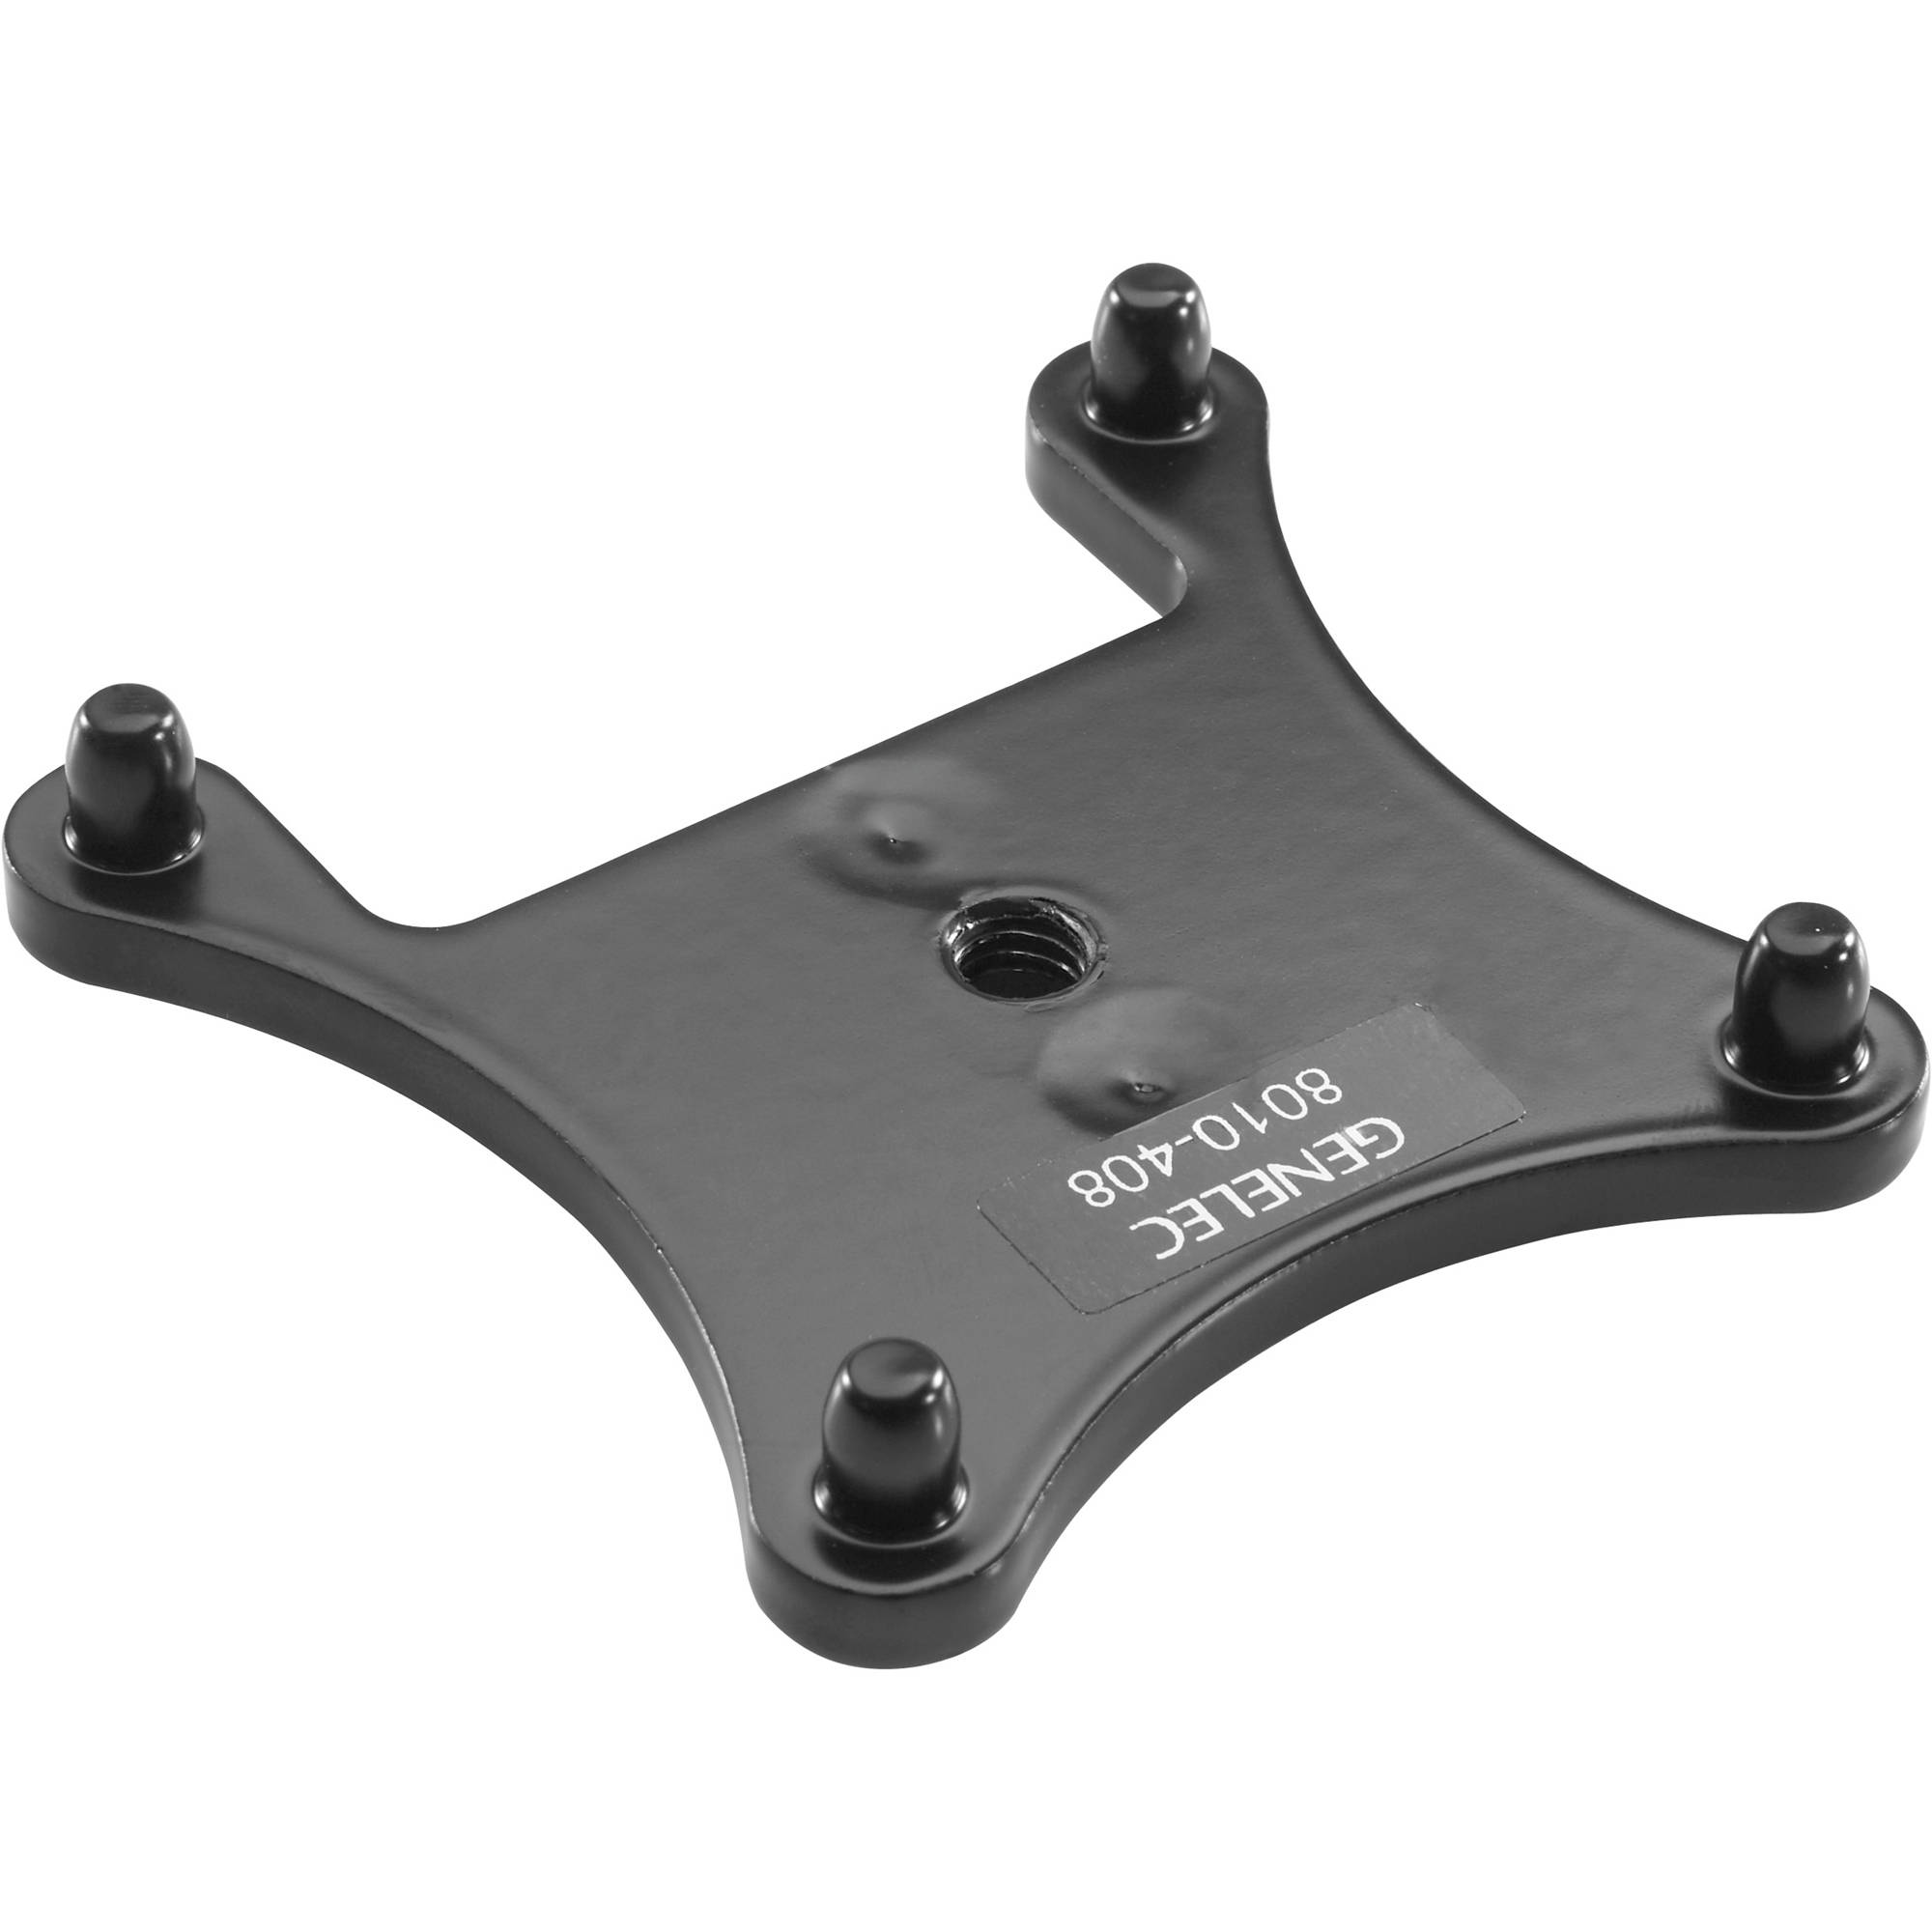 S360-408B Stand Plate for S360